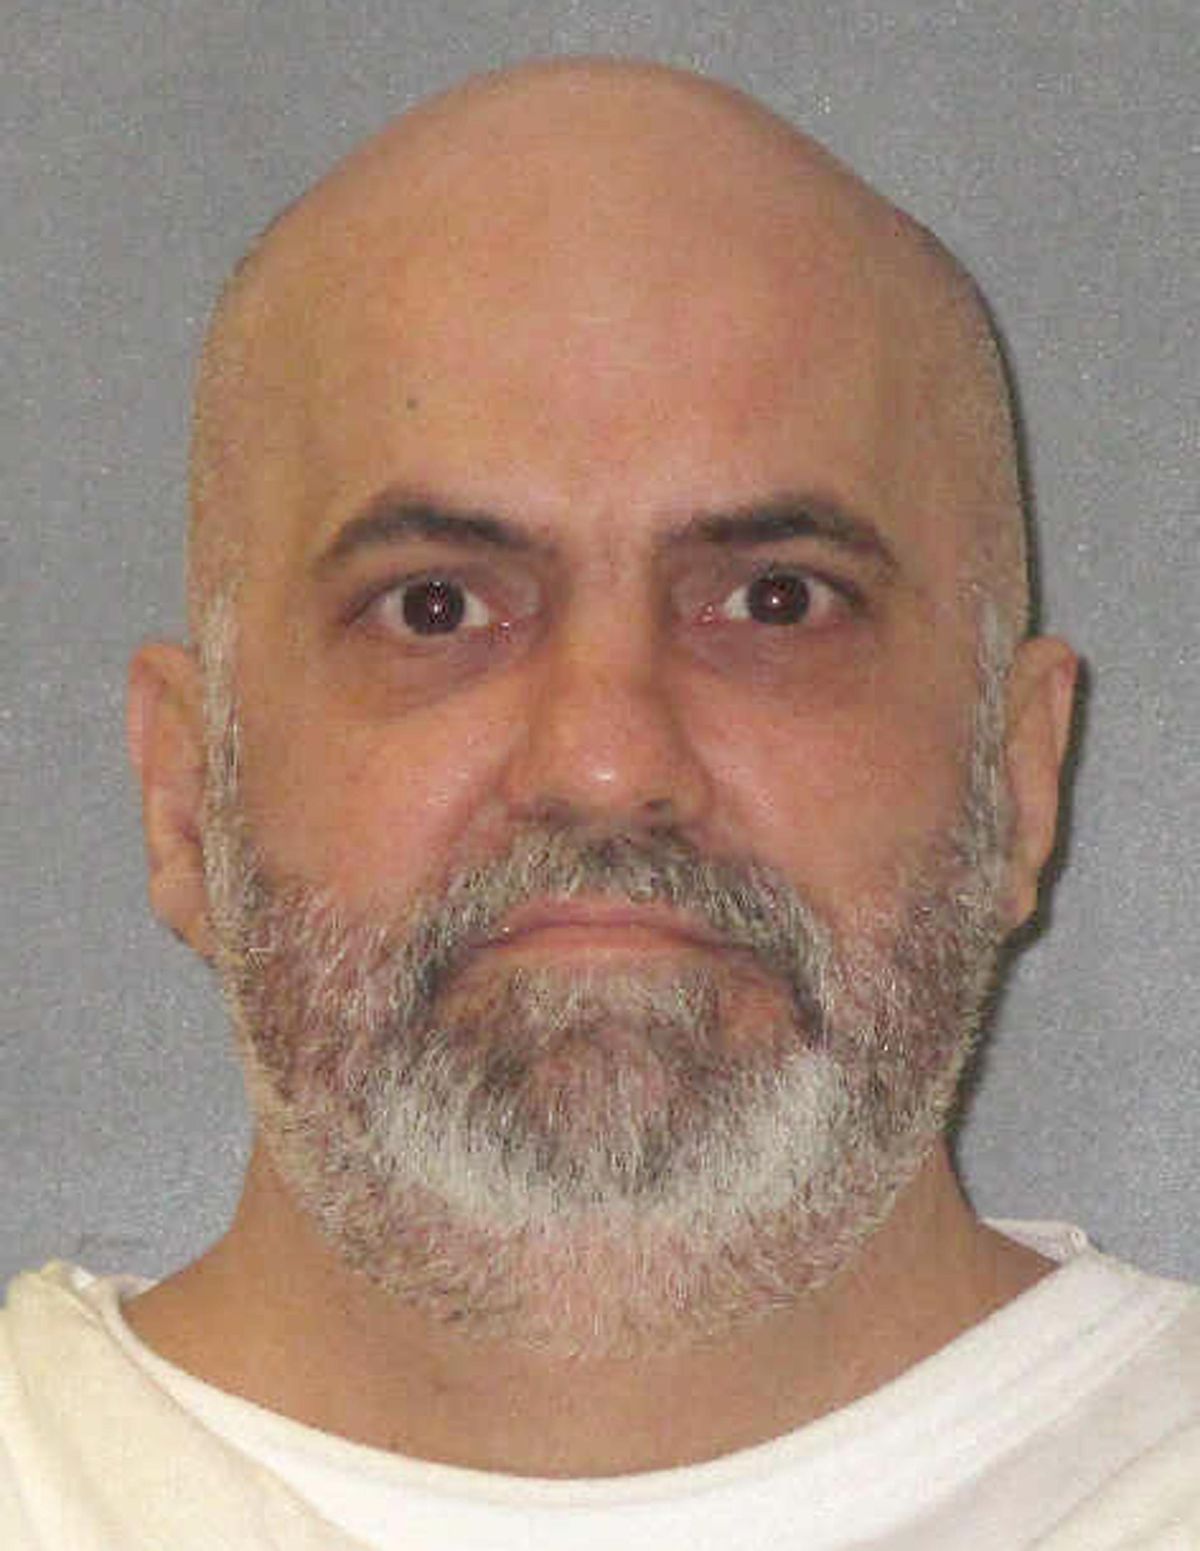 Texas Inmate Executed For Killing Girlfriend In 2000 The Spokesman Review